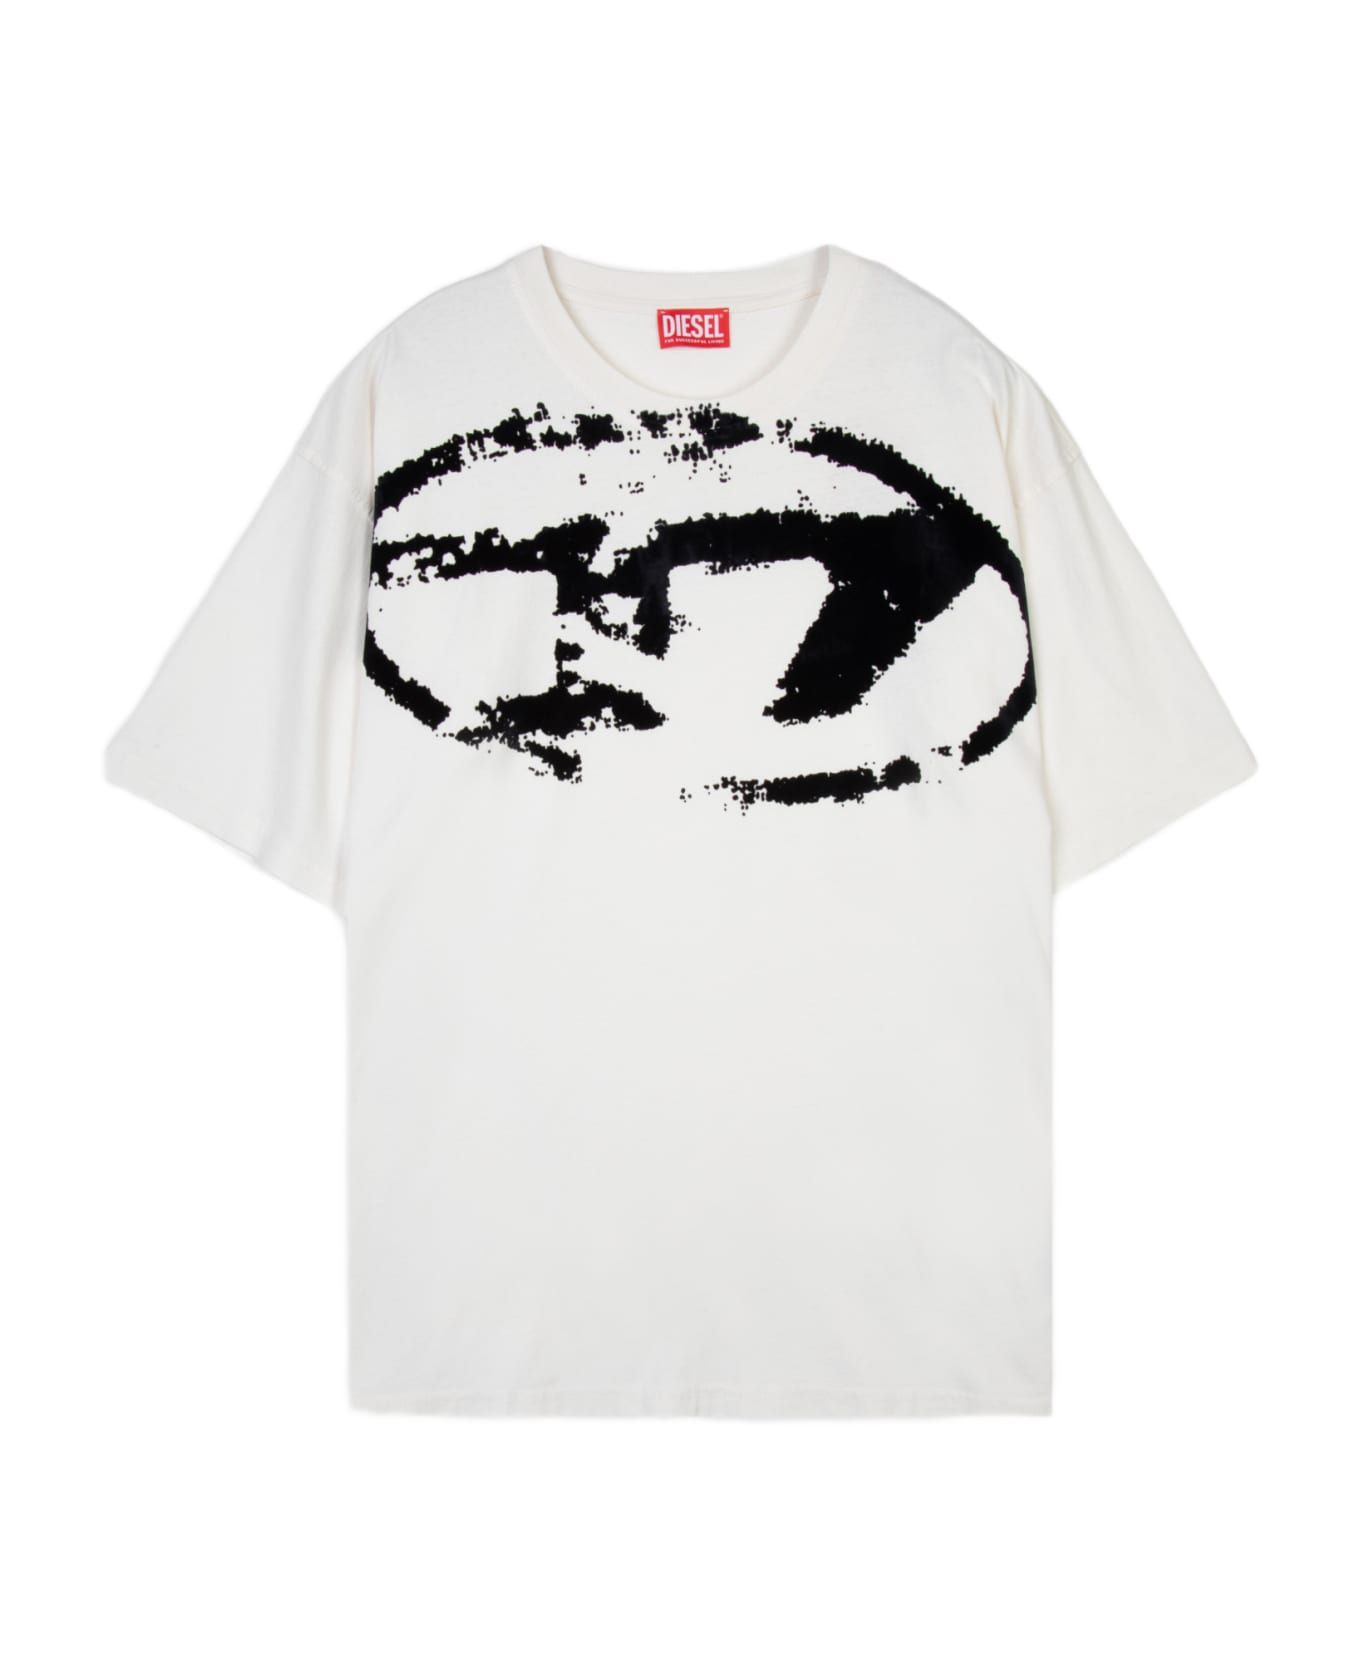 Diesel T-boxt-n14 Off white cotton t-shirt with flock logo print - T Boxt N14 - Panna/nero シャツ